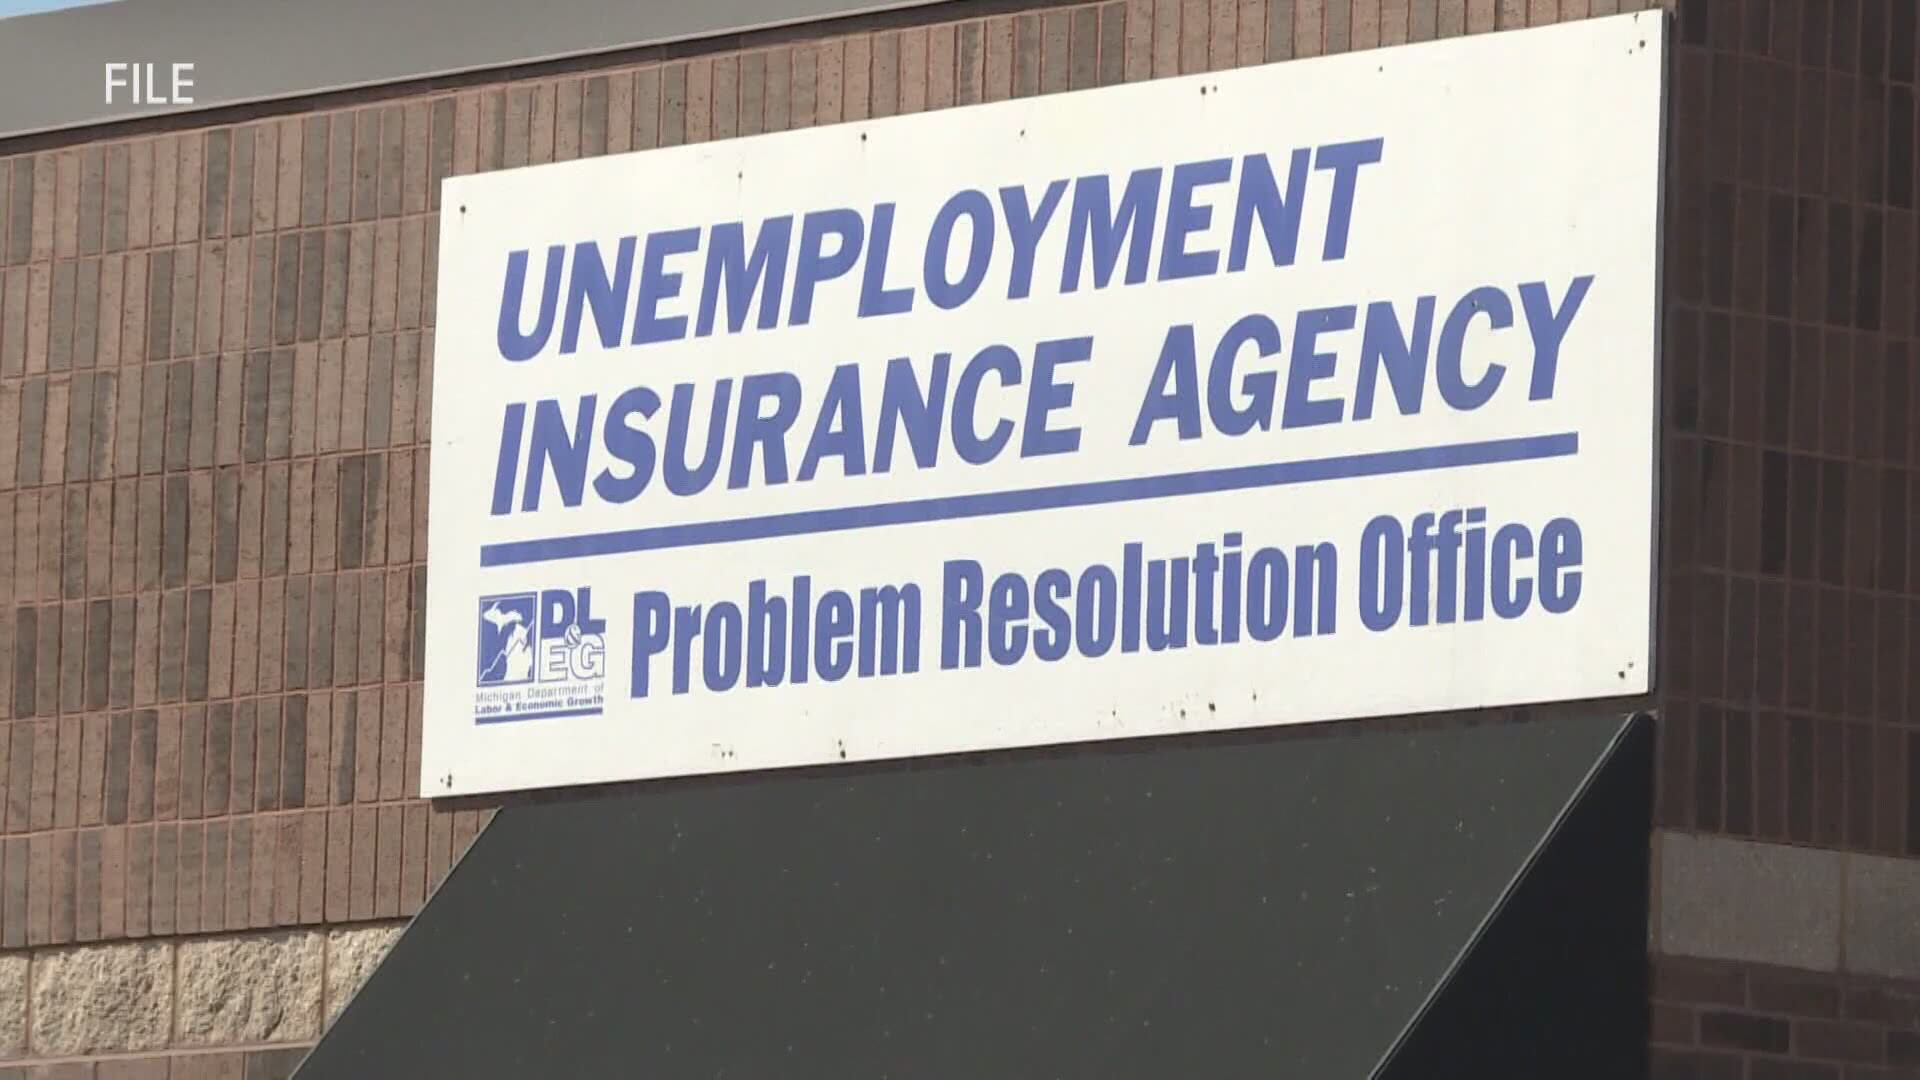 Michigan’s unemployment rate rocketed in April, likely setting an all-time high at 22.7%, as coronavirus restrictions shut down businesses and put people out of work